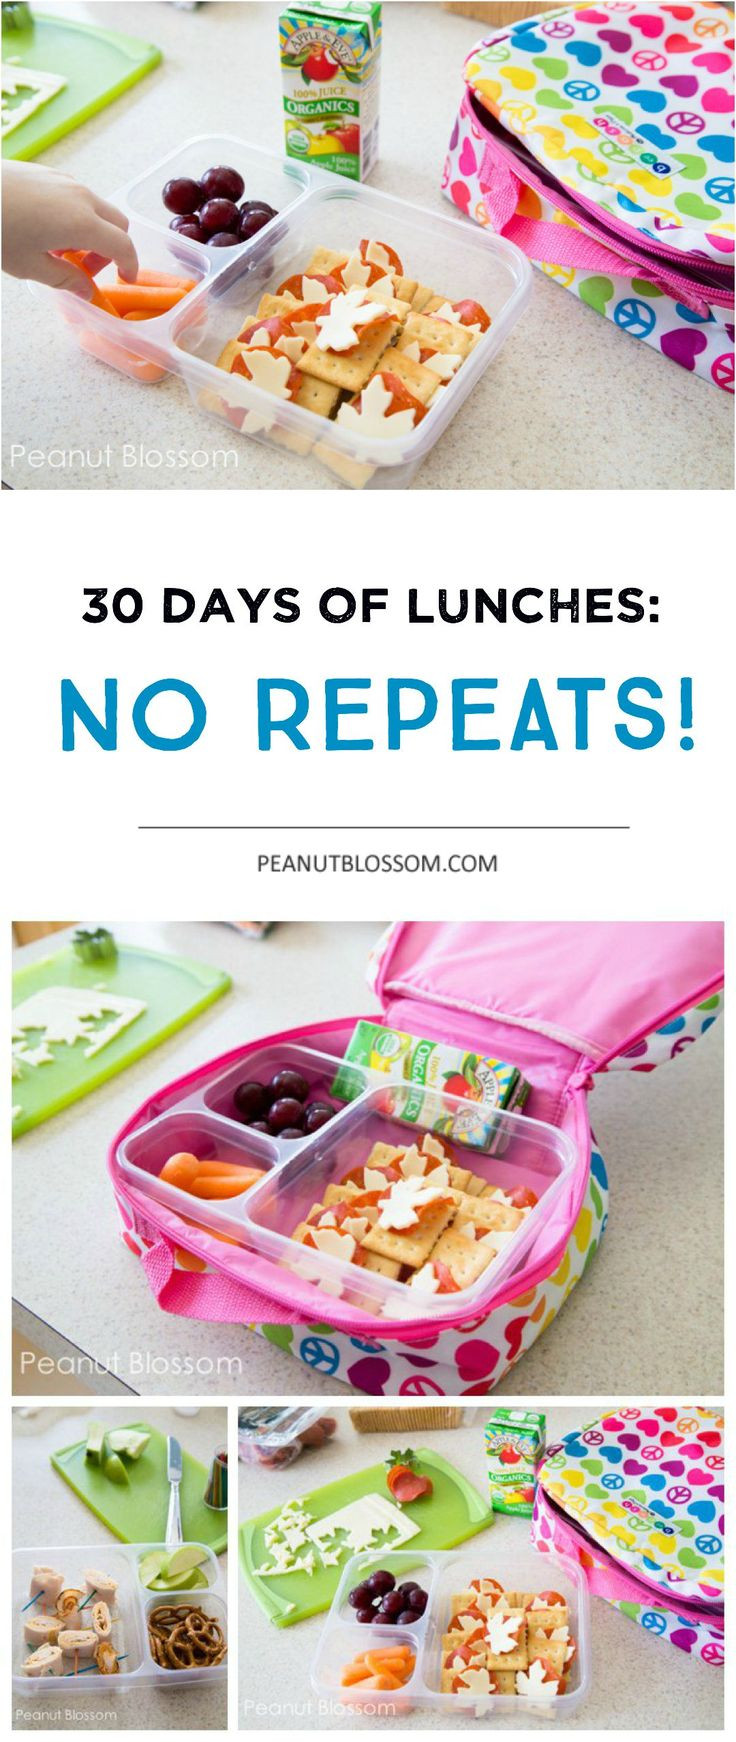 30 days of kids school lunch ideas: No Repeats!